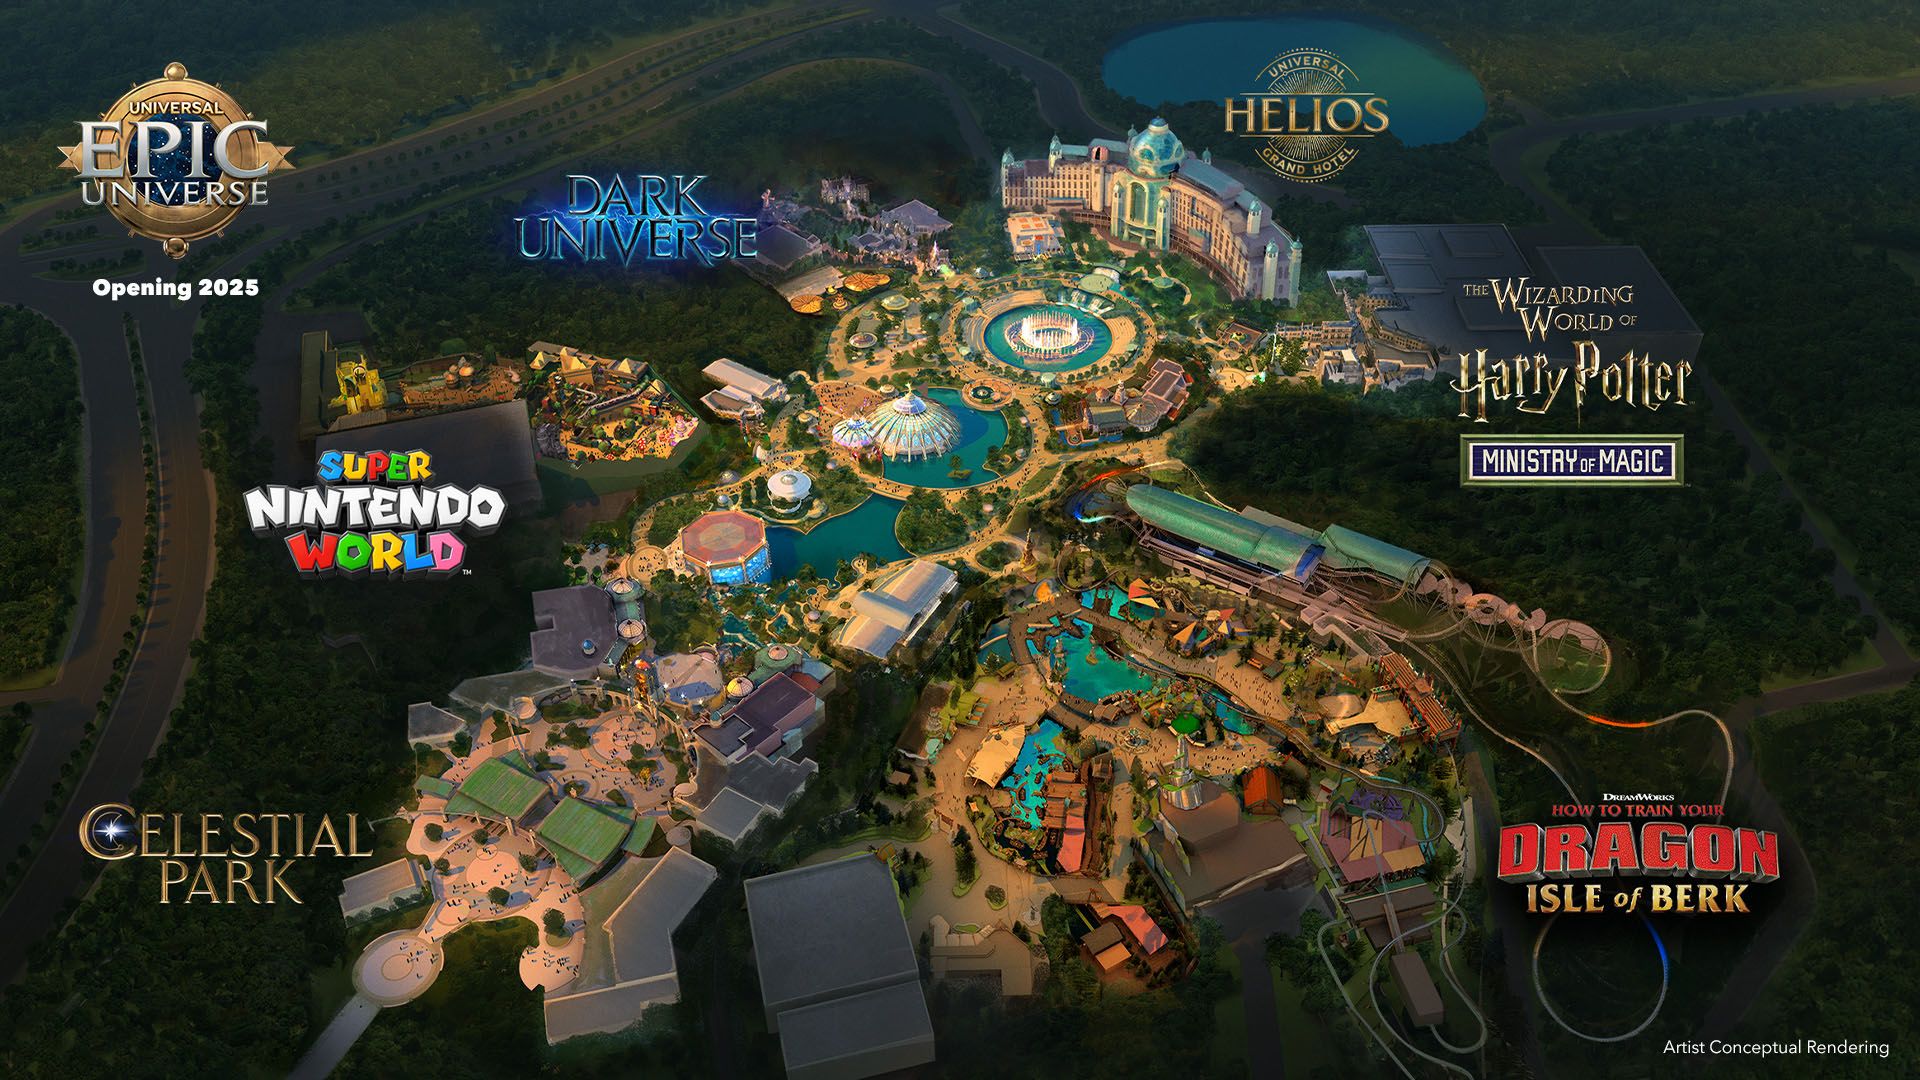 An artist-rendered map of the upcoming Epic Universe theme park at Universal Orlando Resort.